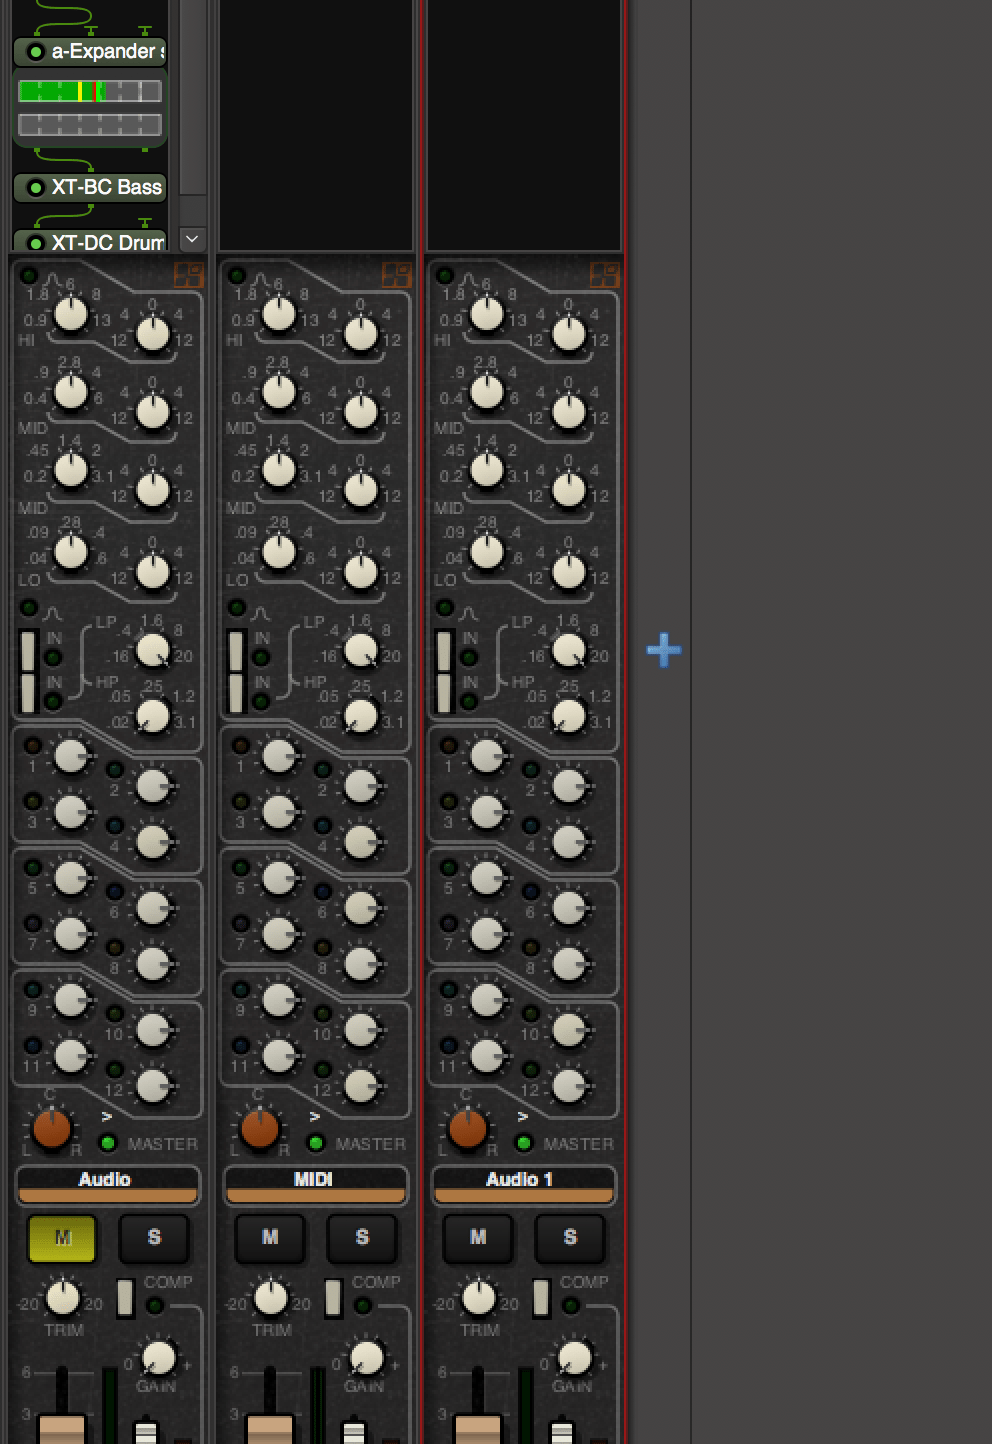 Add Track in the Mixer